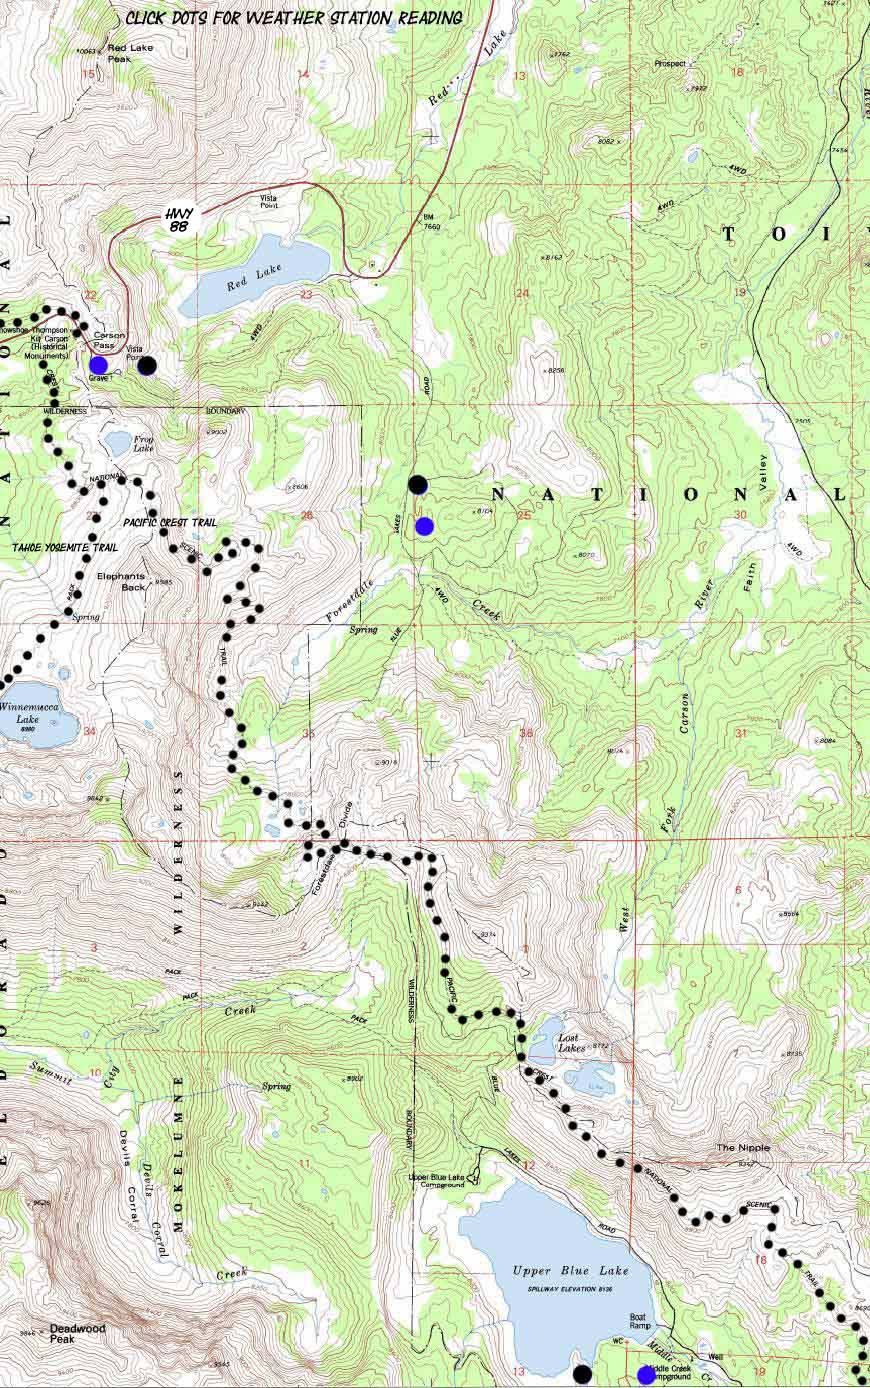 Carson Pass Weather Stations with Tahoe Yosemite and PCT Trails